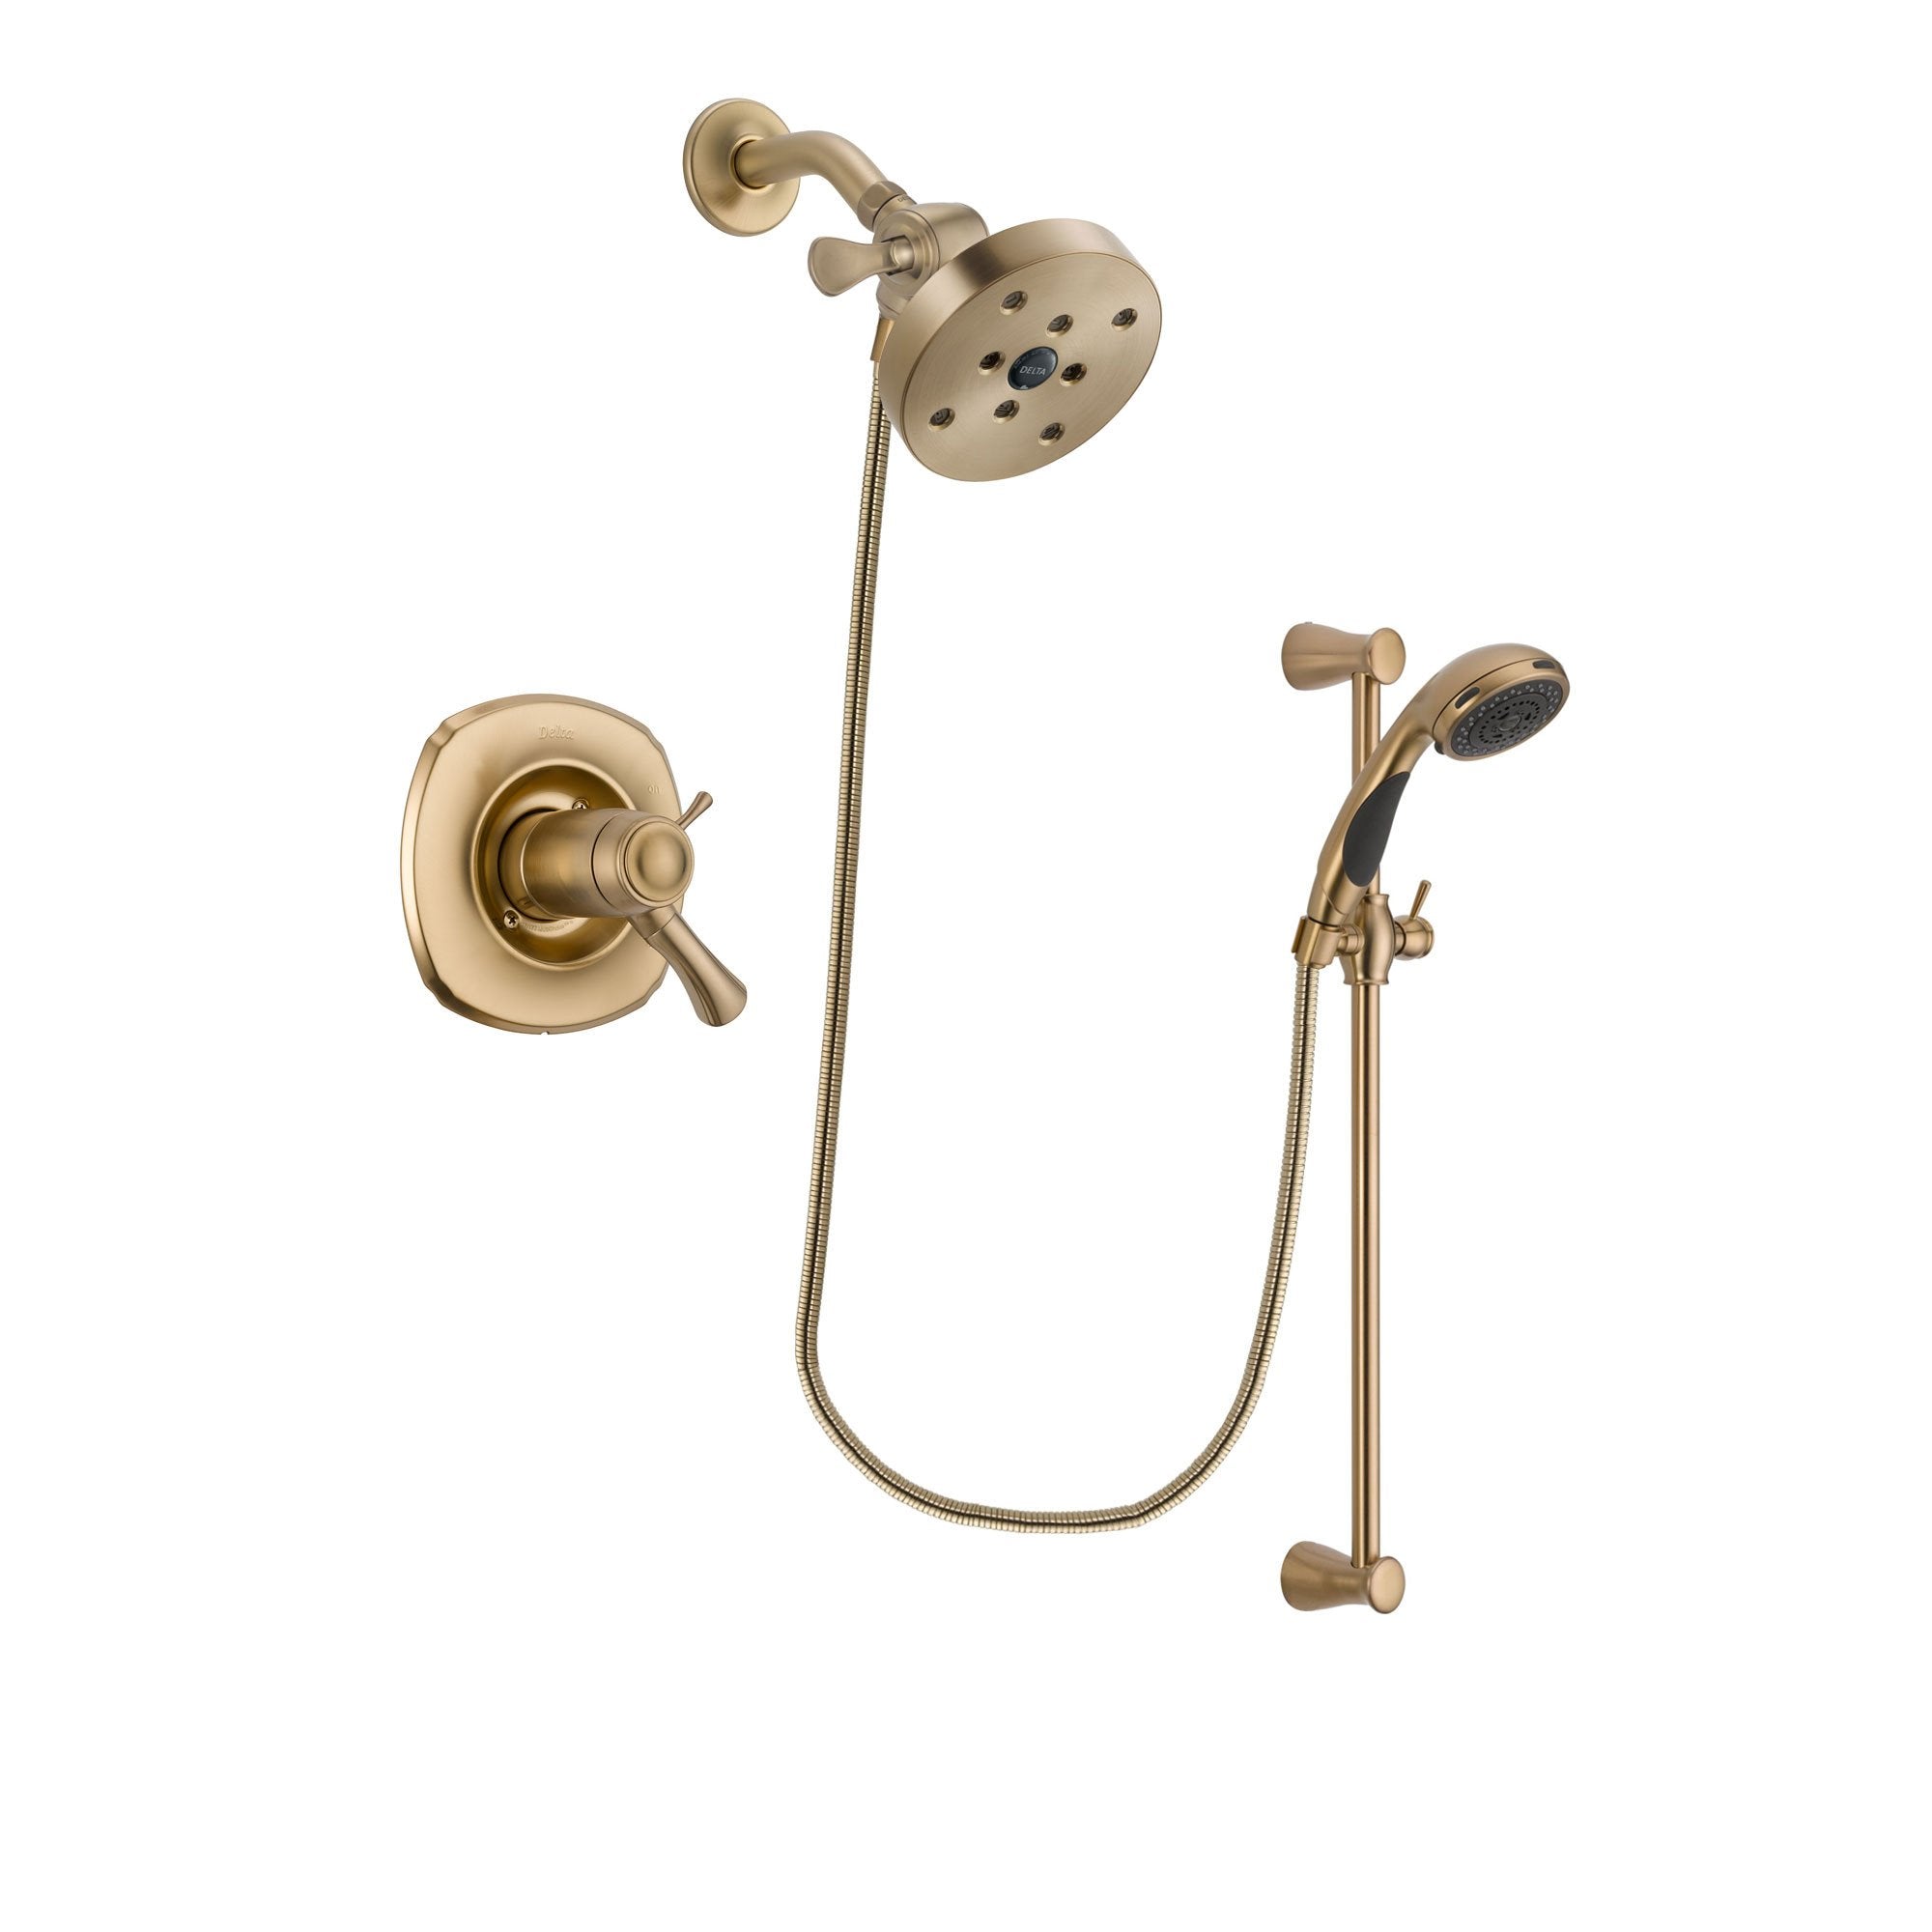 Delta Addison Champagne Bronze Finish Thermostatic Shower Faucet System Package with 5-1/2 inch Showerhead and Personal Handheld Shower Sprayer with Slide Bar Includes Rough-in Valve DSP3504V